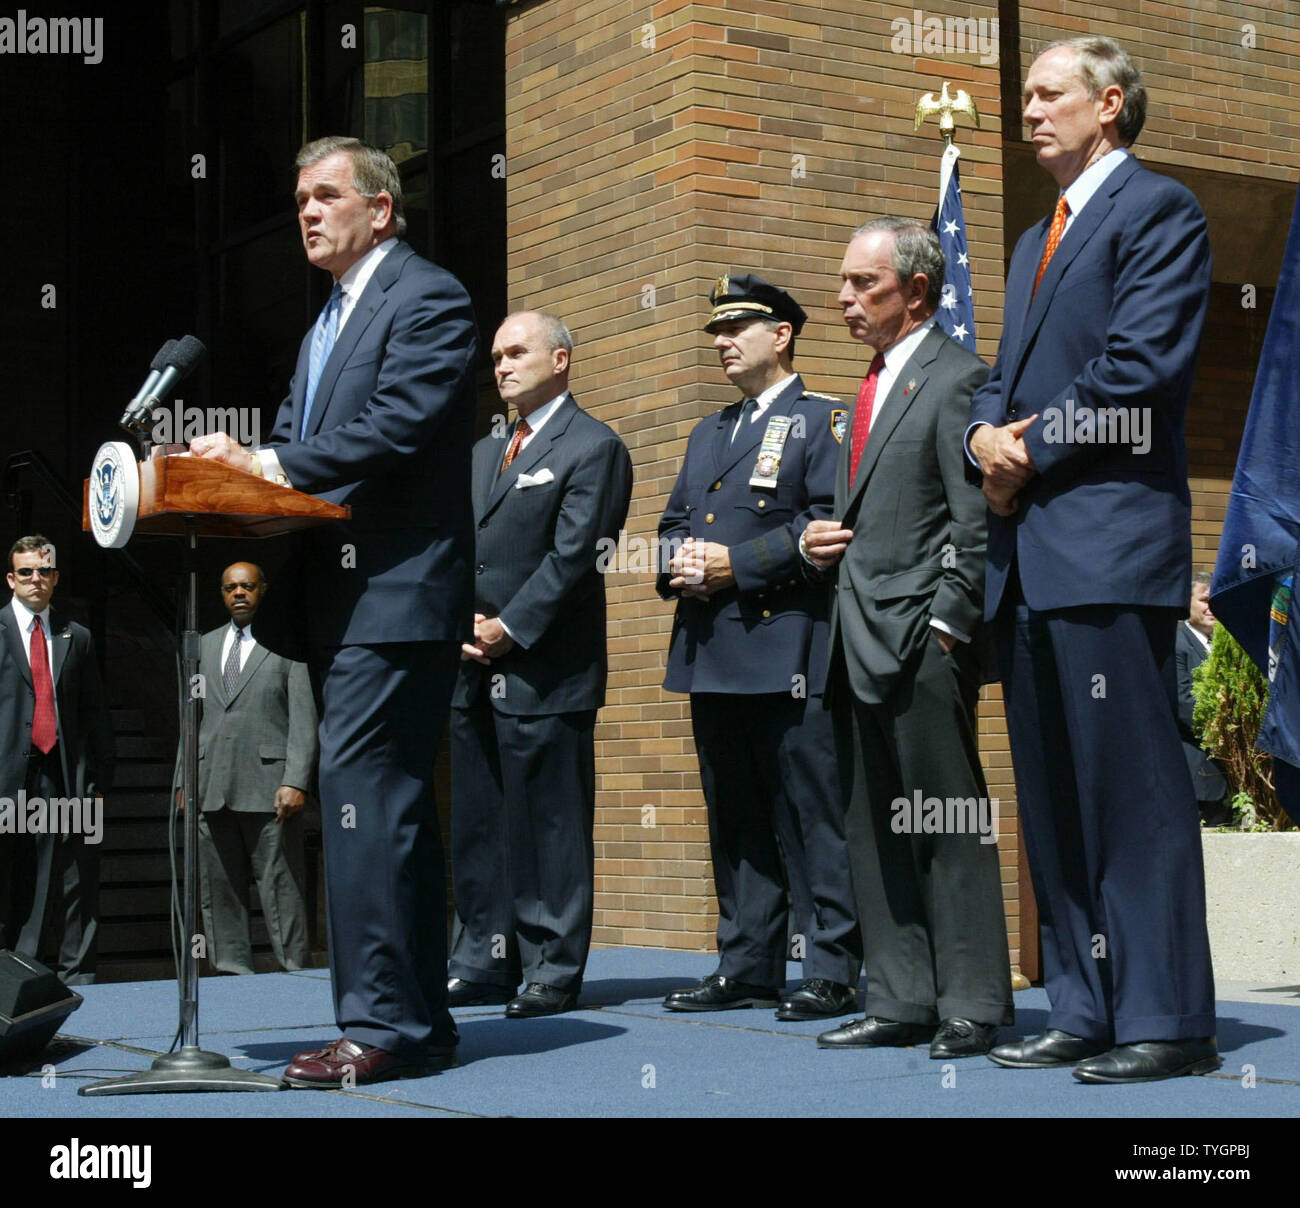 Secretary of Homeland Security Tom Ridge (L) discusses special security measures to be in place during the Republican National Convention as New York City Police commissioner Raymond Kelly (2nd L) Joseph Esposito, police chief of department, mayor Michael Bloomberg (2nd R) and New York State governor George Pataki listen during a press conferance at the NYPD headquarters August 25, 2004 in New York City.  (UPI Photo/Monika Graff) Stock Photo